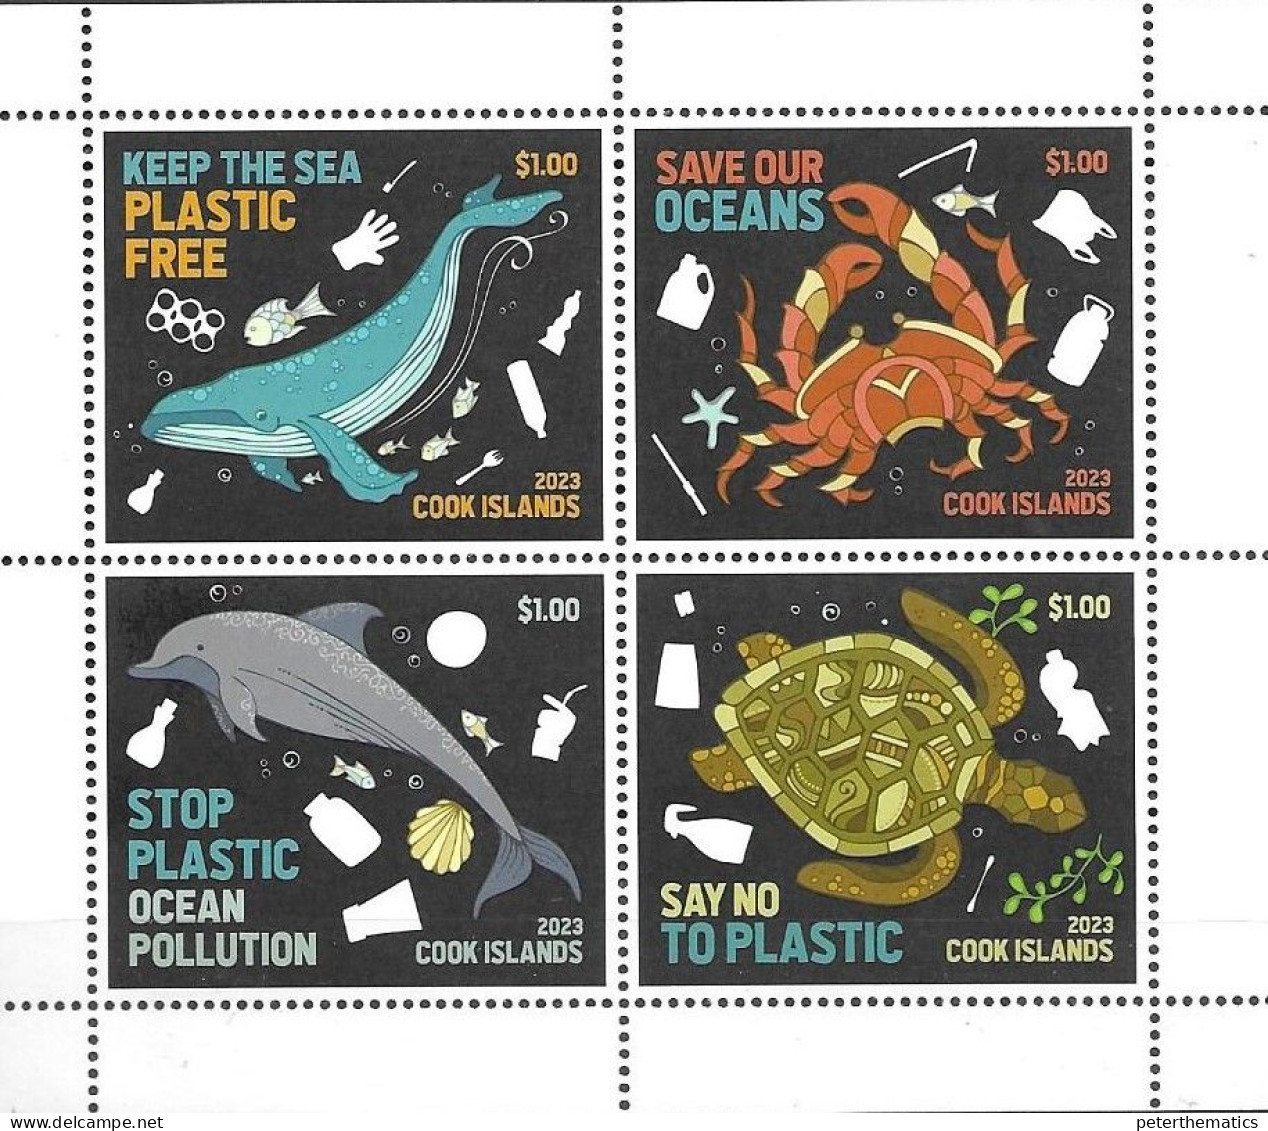 COOK ISLANDS, 2023, MNH, STOP PLASTIC POLLUTION, WHALES, DOLPHINS, TURTLES, CRABS,  SHEETLET OF 4v - Schildpadden